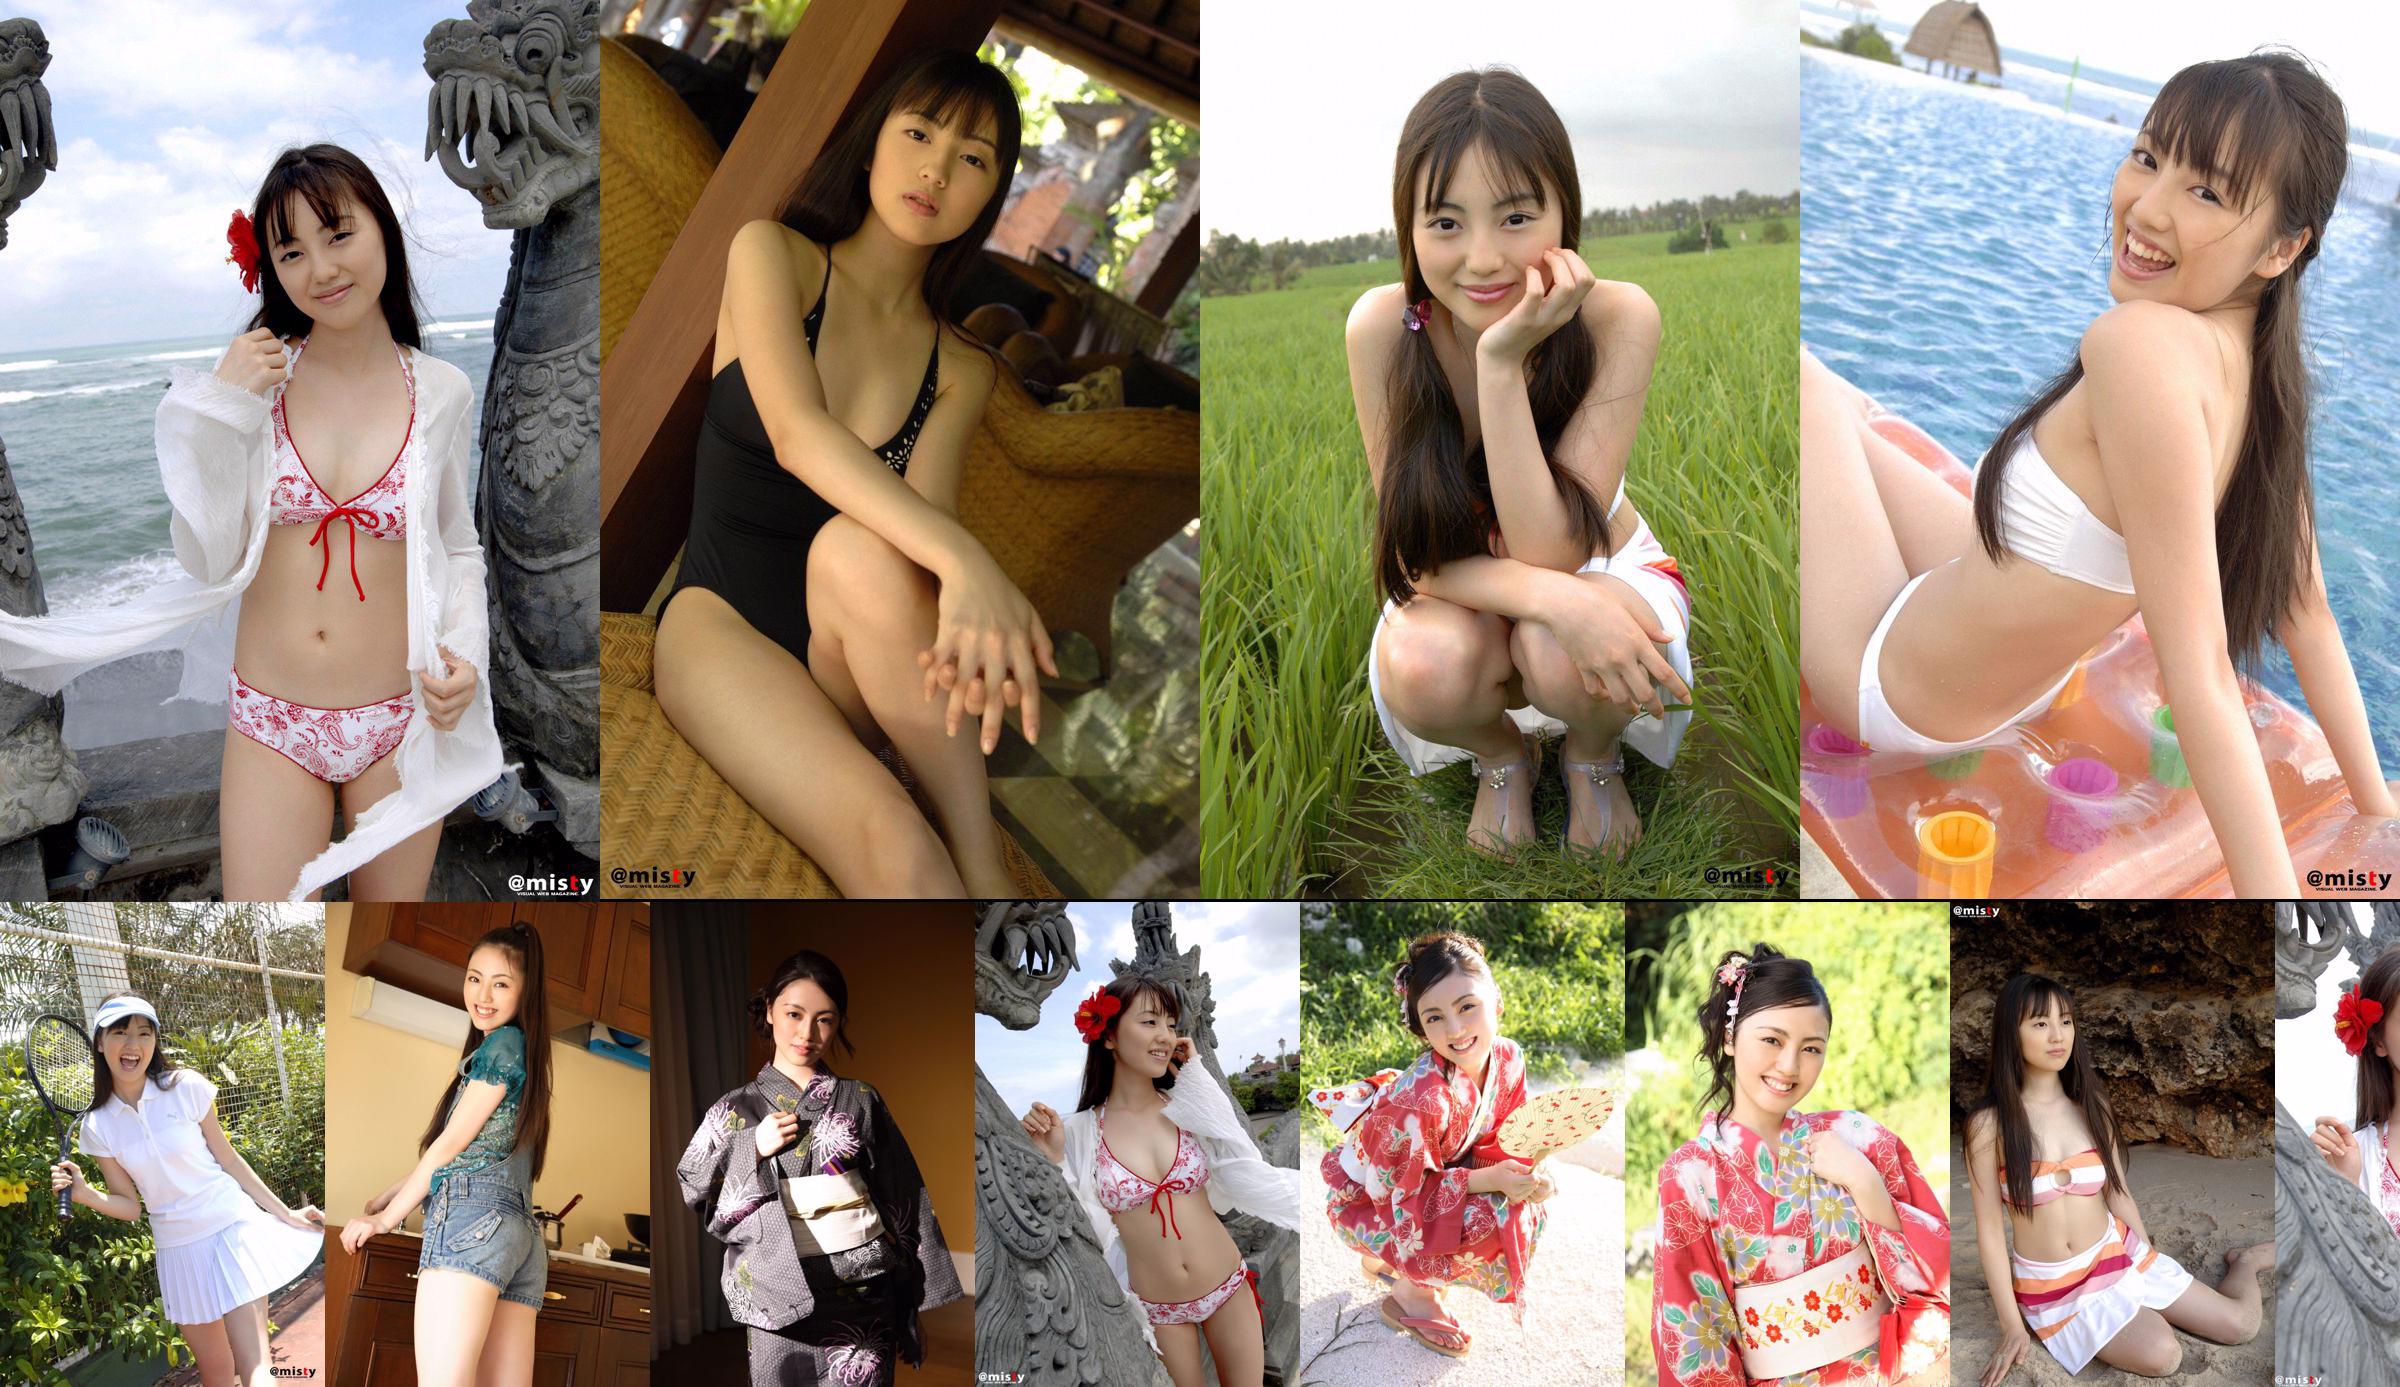 [@misty] No.156 Miyu Sawai Sawai Miyu / Sawai Miyu No.b434d9 Page 23